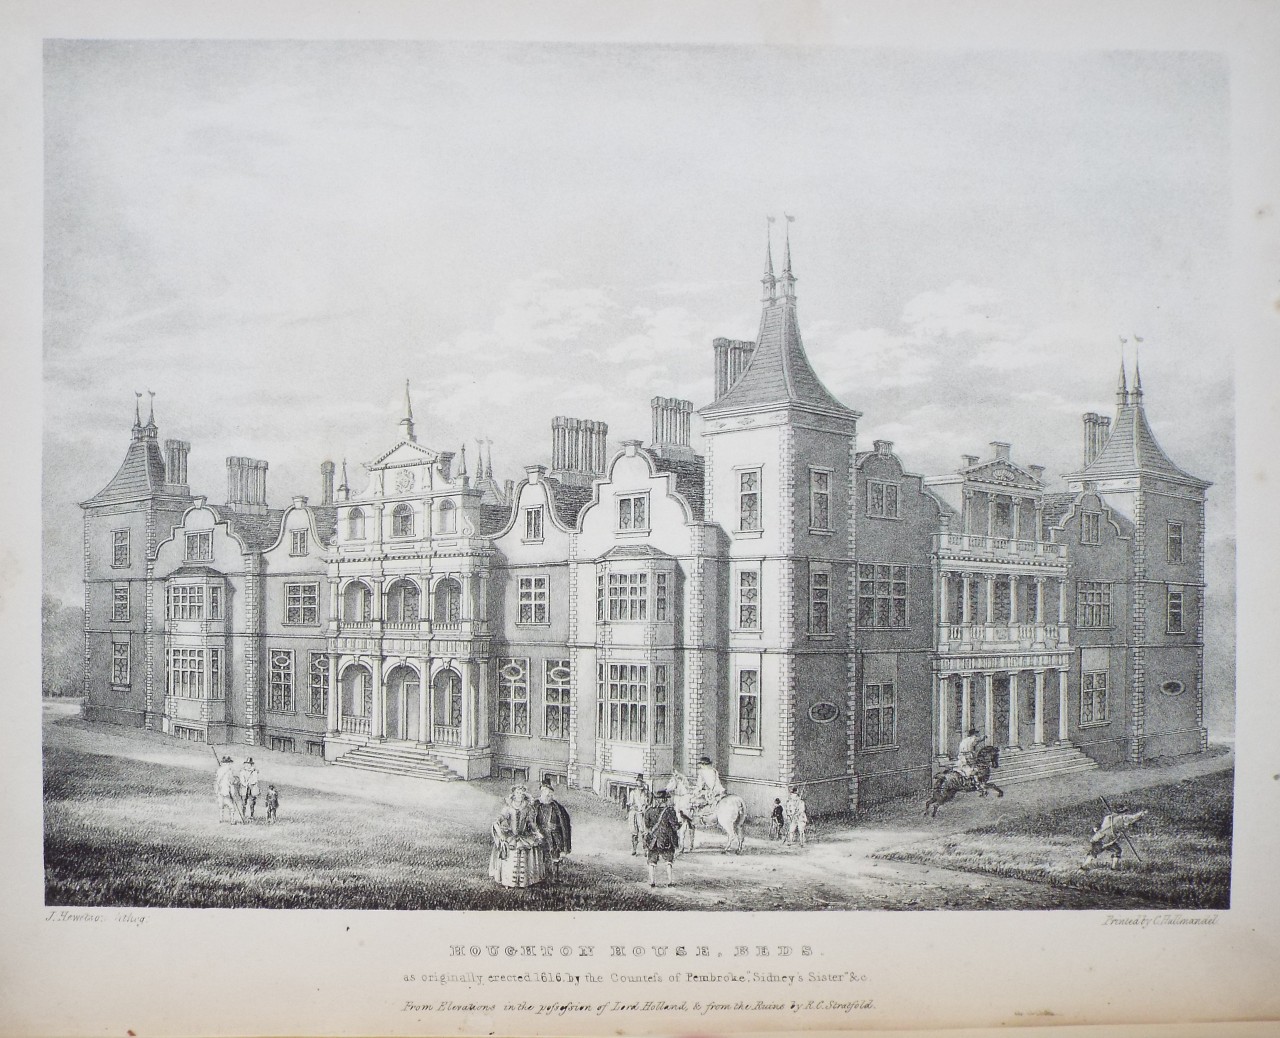 Lithograph - Houghton House, Beds. as originally erectected 1616 by the Countess of Pembroke, 